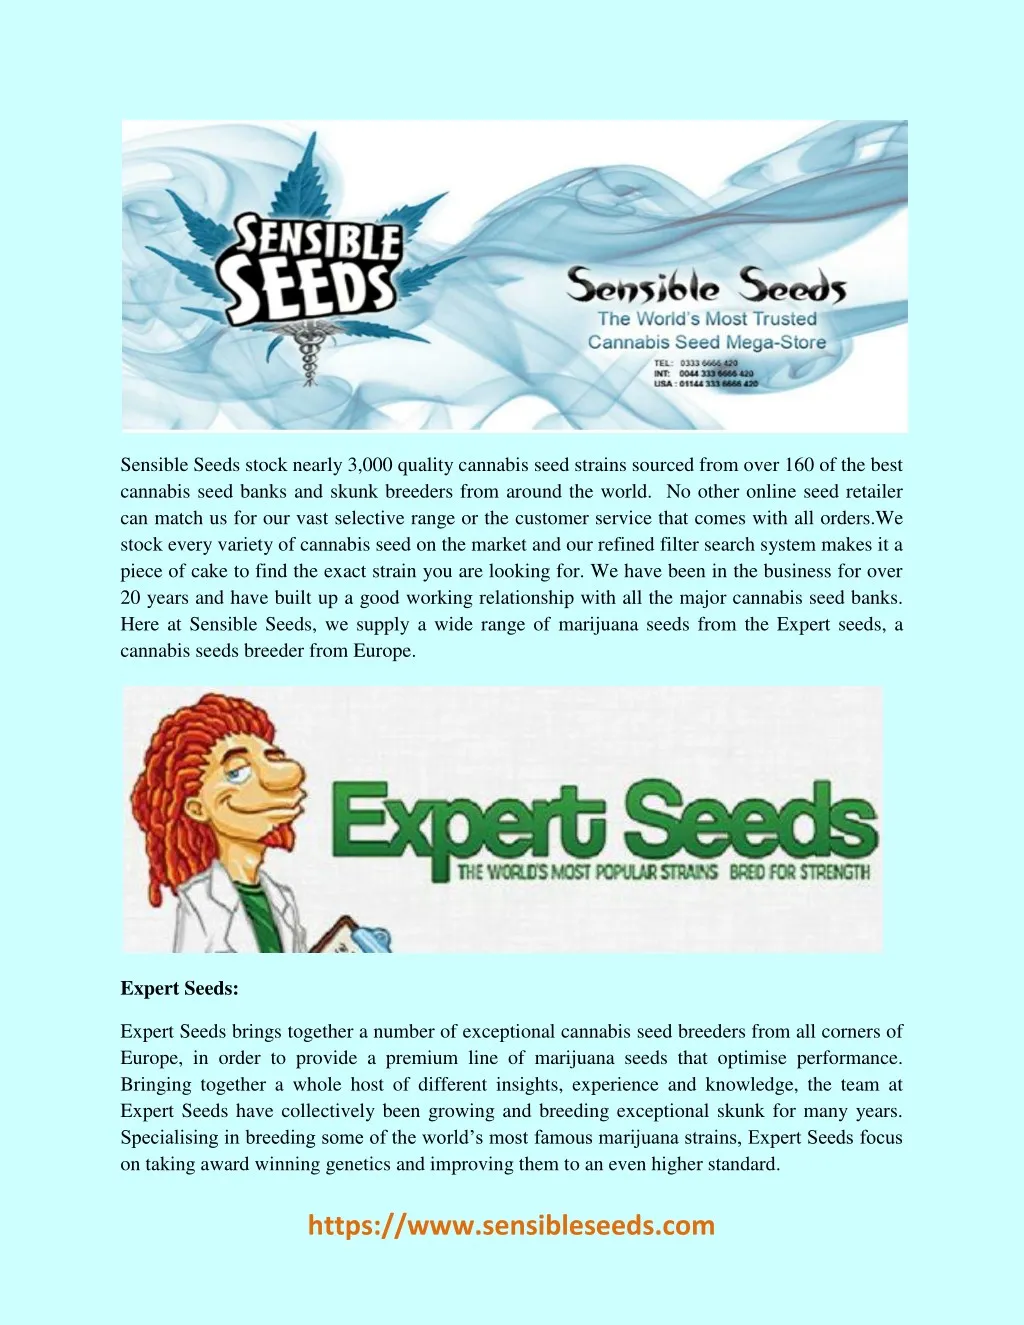 sensible seeds stock nearly 3 000 quality